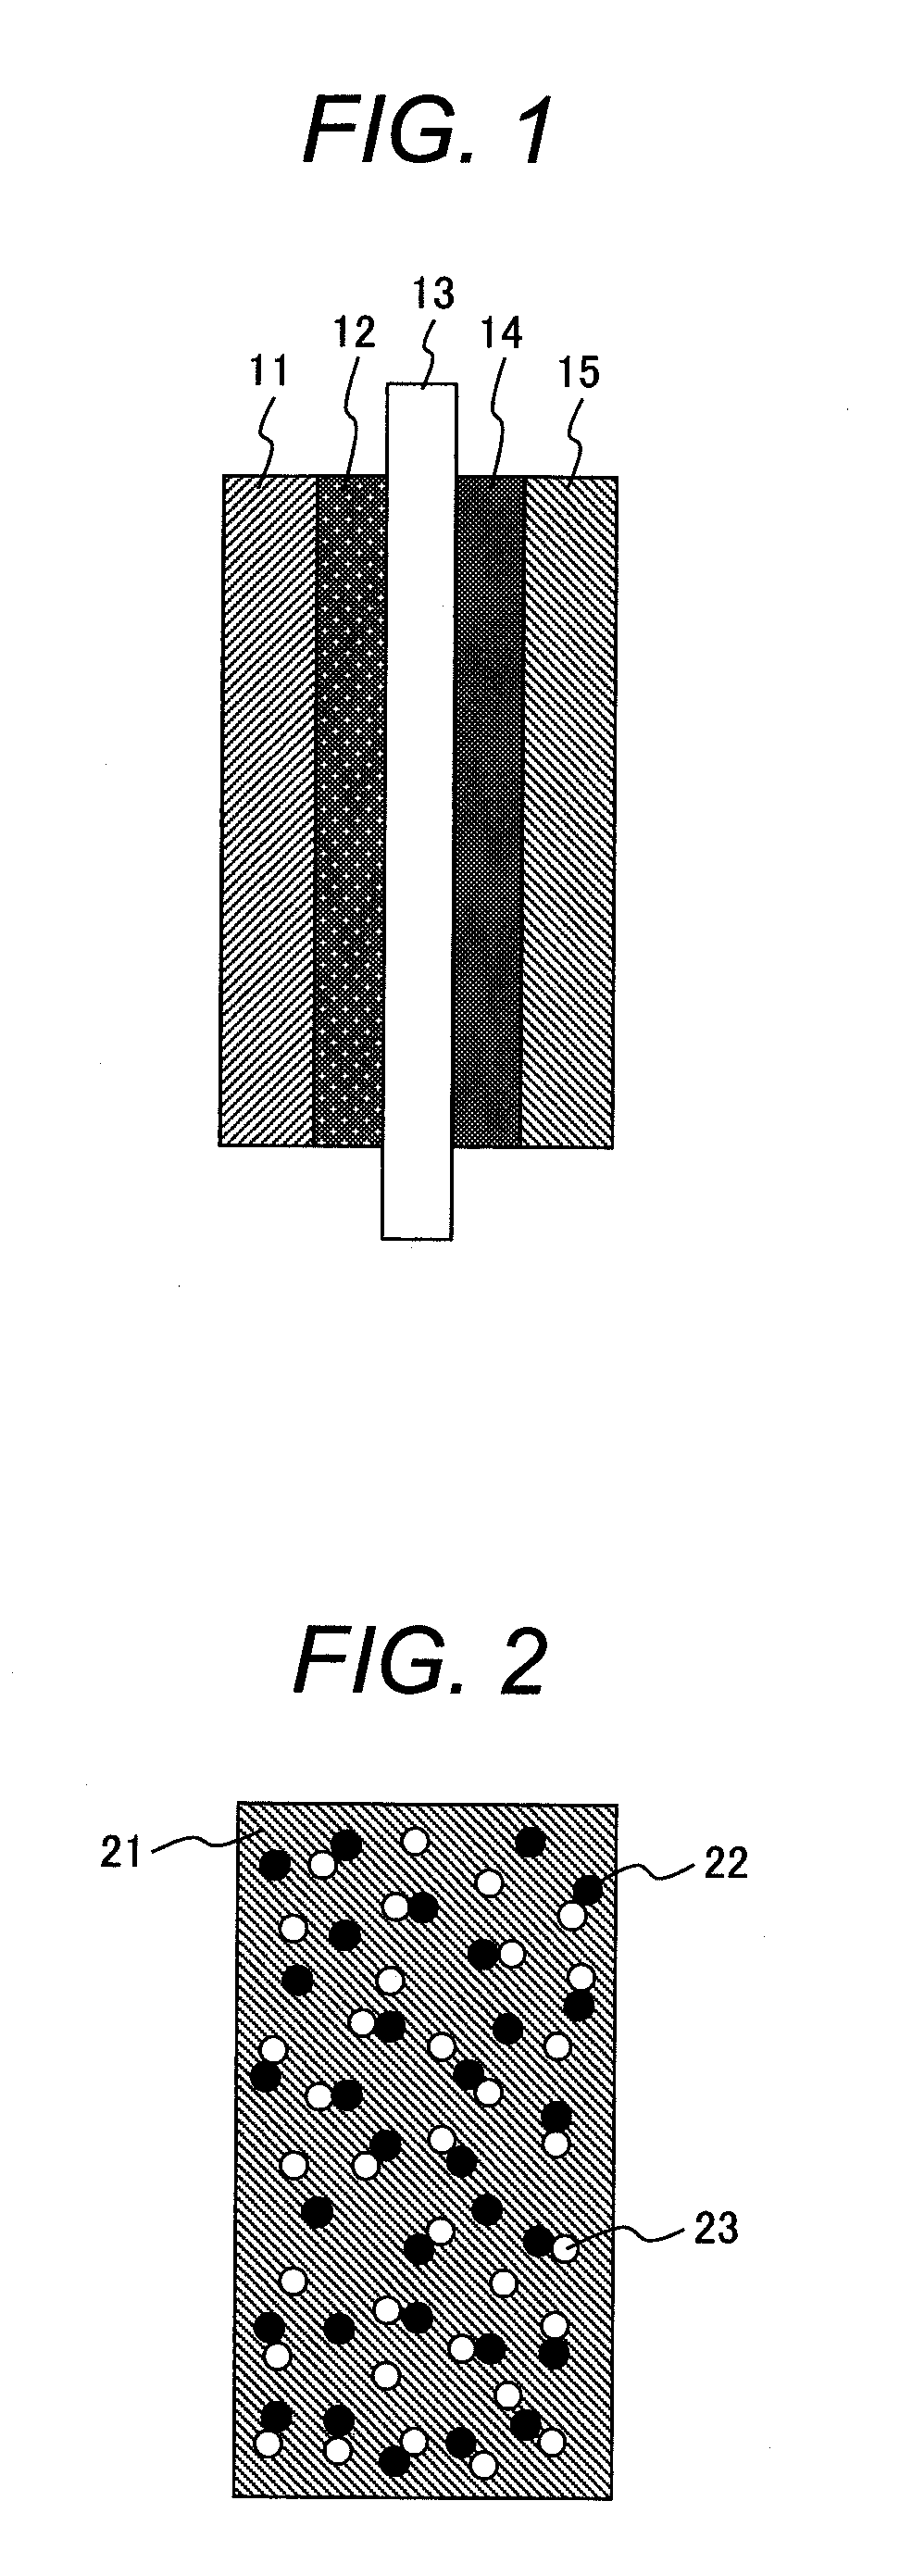 Membrane electrode assembly for fuel cell